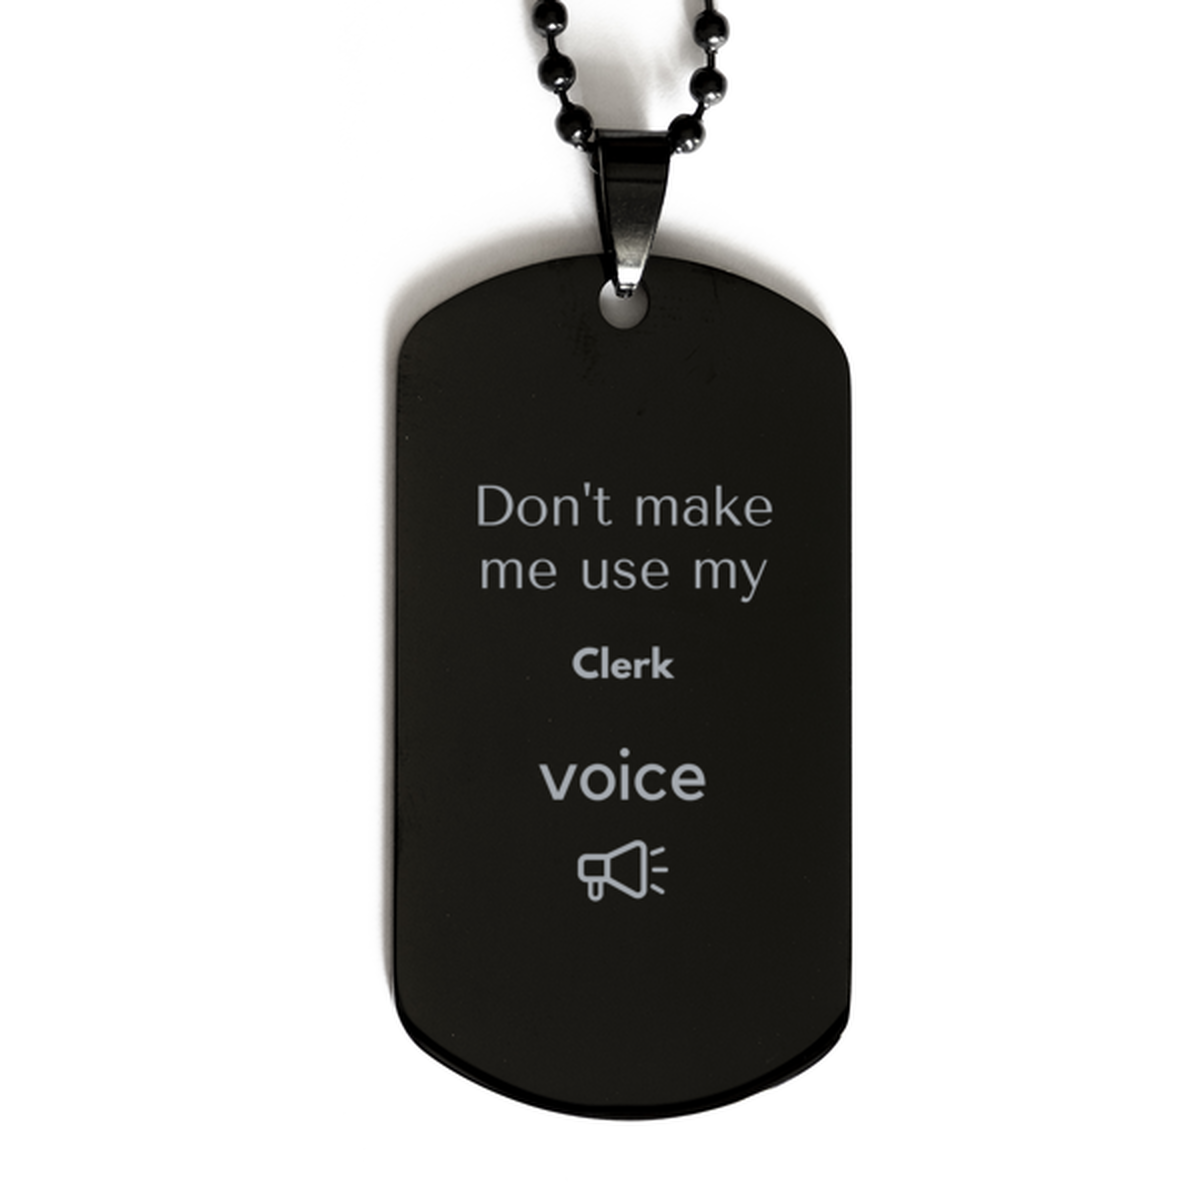 Don't make me use my Clerk voice, Sarcasm Clerk Gifts, Christmas Clerk Black Dog Tag Birthday Unique Gifts For Clerk Coworkers, Men, Women, Colleague, Friends